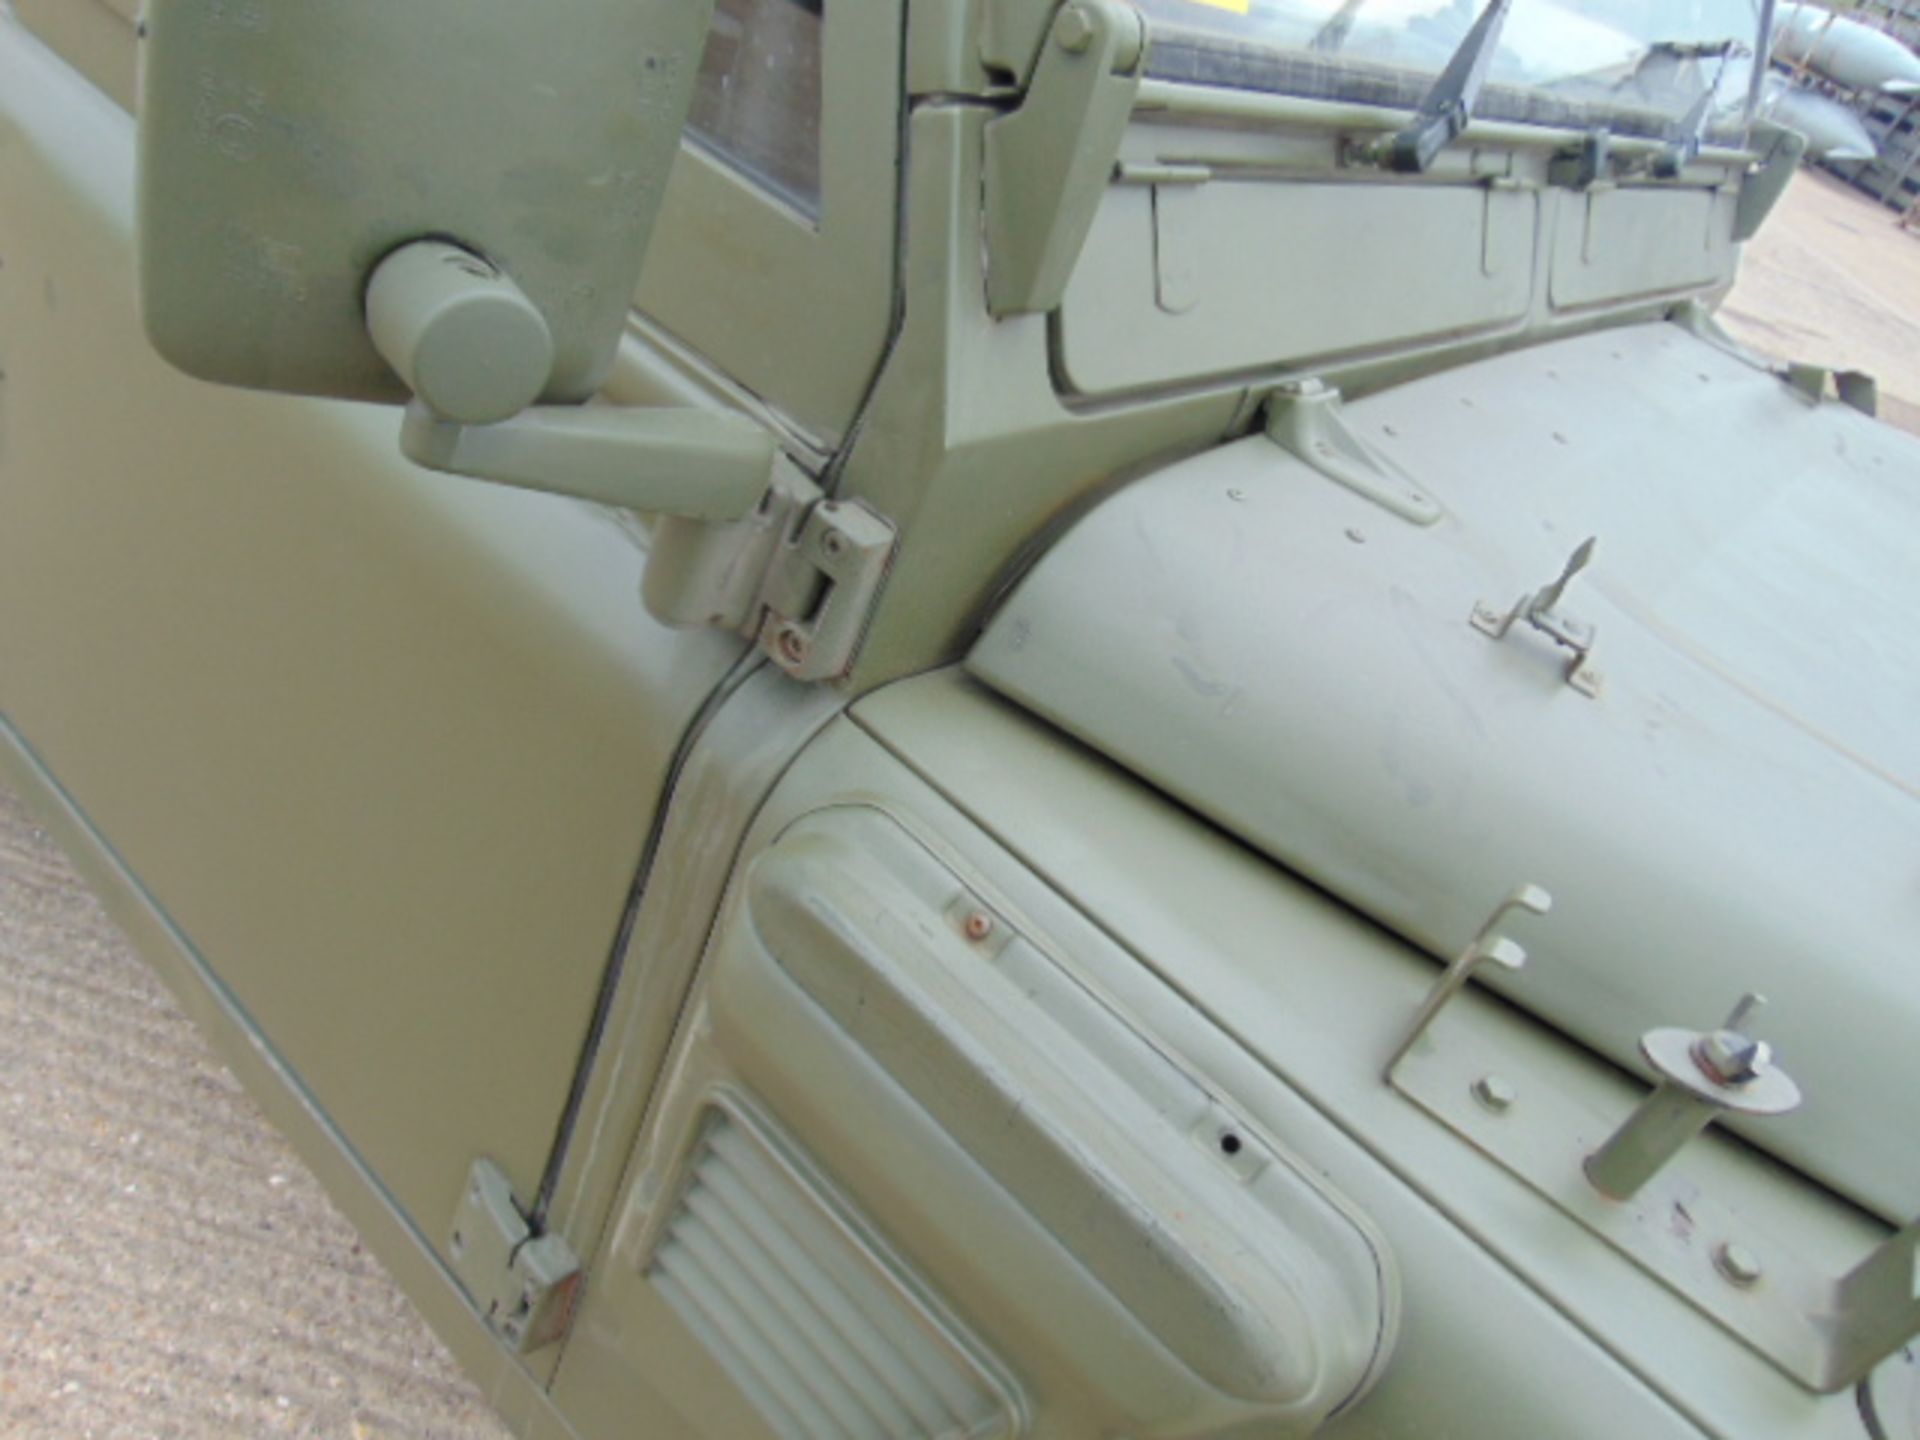 Military Specification Land Rover Wolf 90 Hard Top - Image 17 of 22